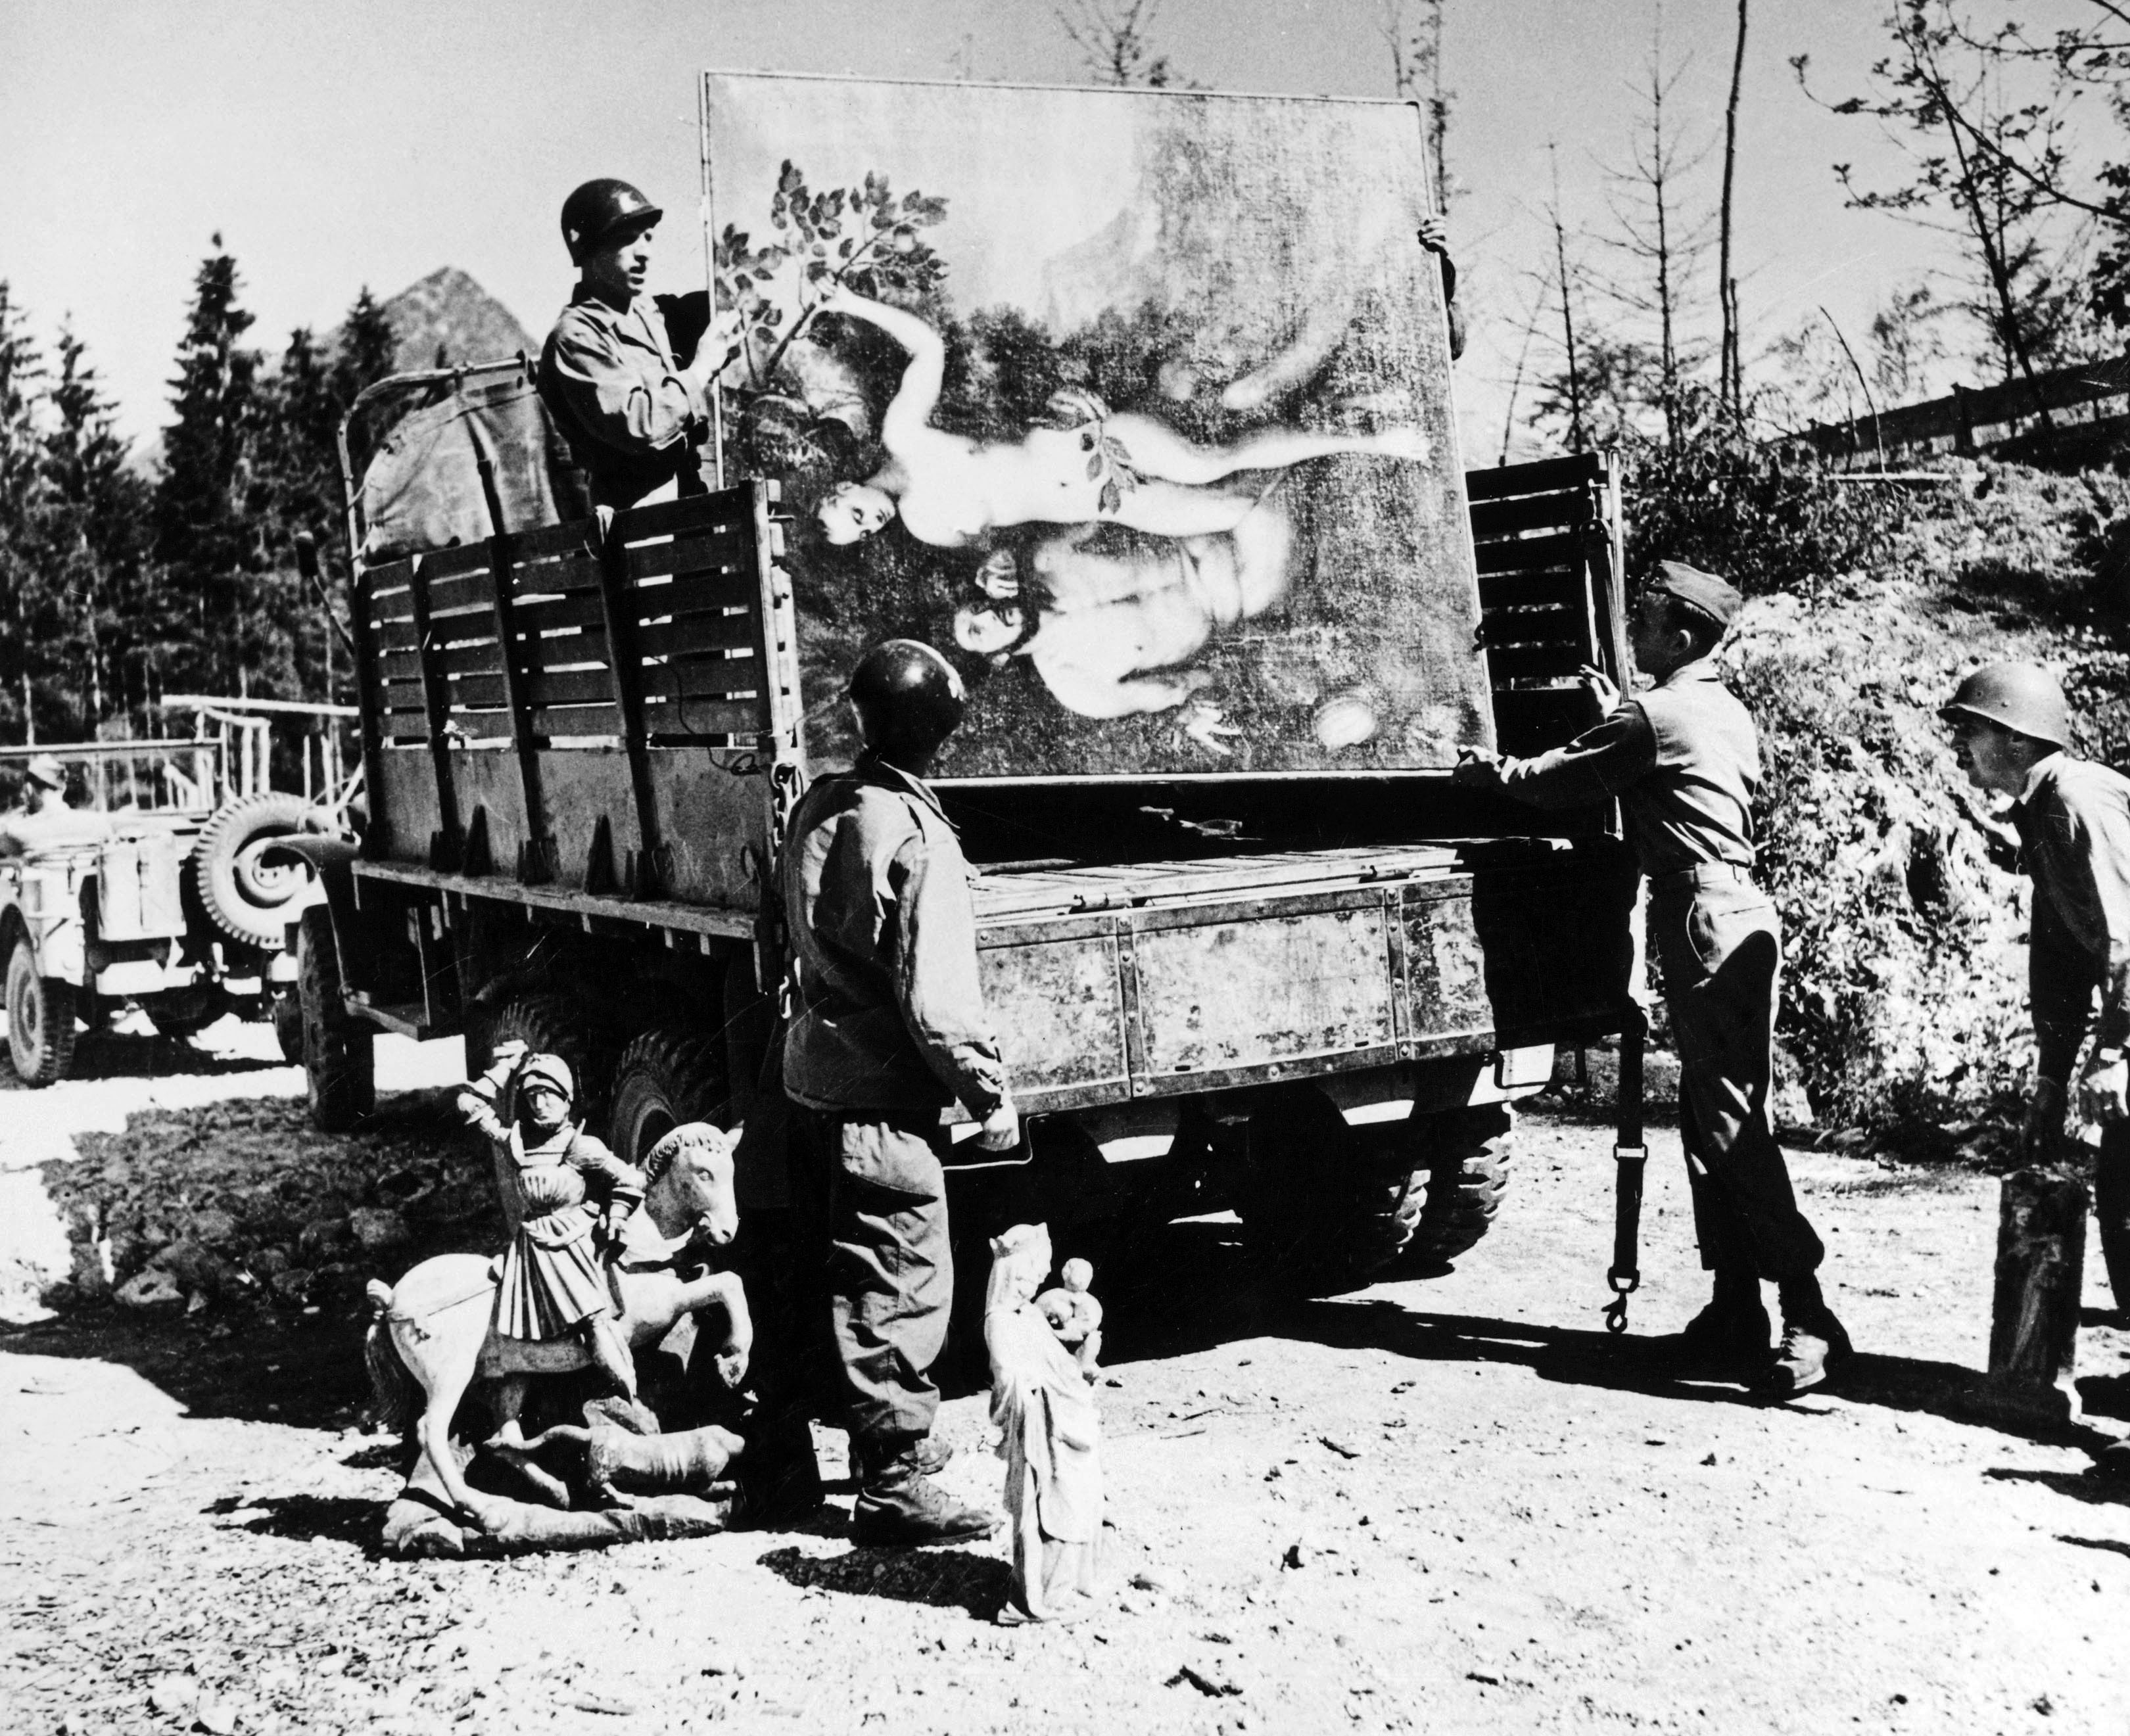 WWII: STOLEN ART, 1945. American soldiers loading works of art stolen by Hermann Goering onto a truck. Photograph, 1945. © Granger NYC / Rue des Archives.